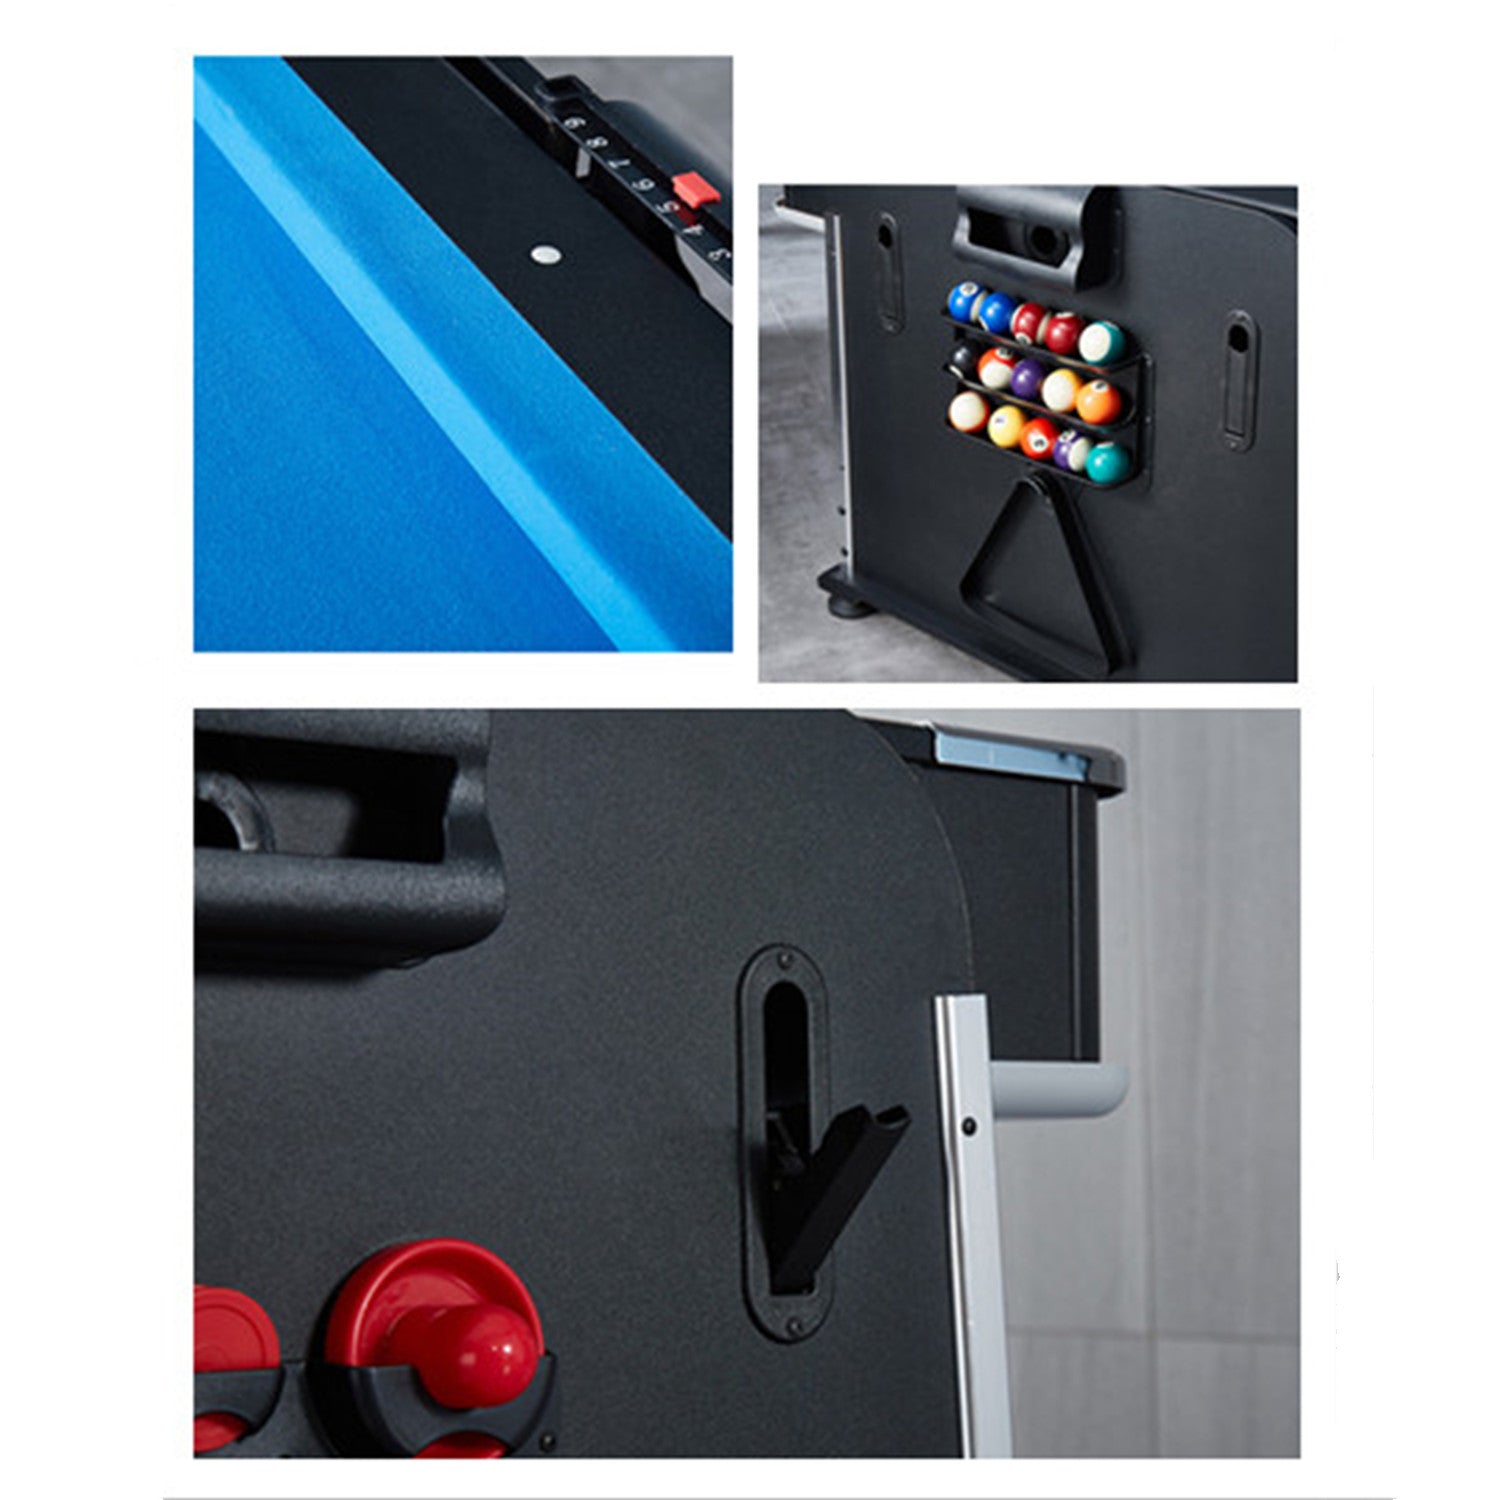 7FT 4IN1 Convertible Pool Table-Green